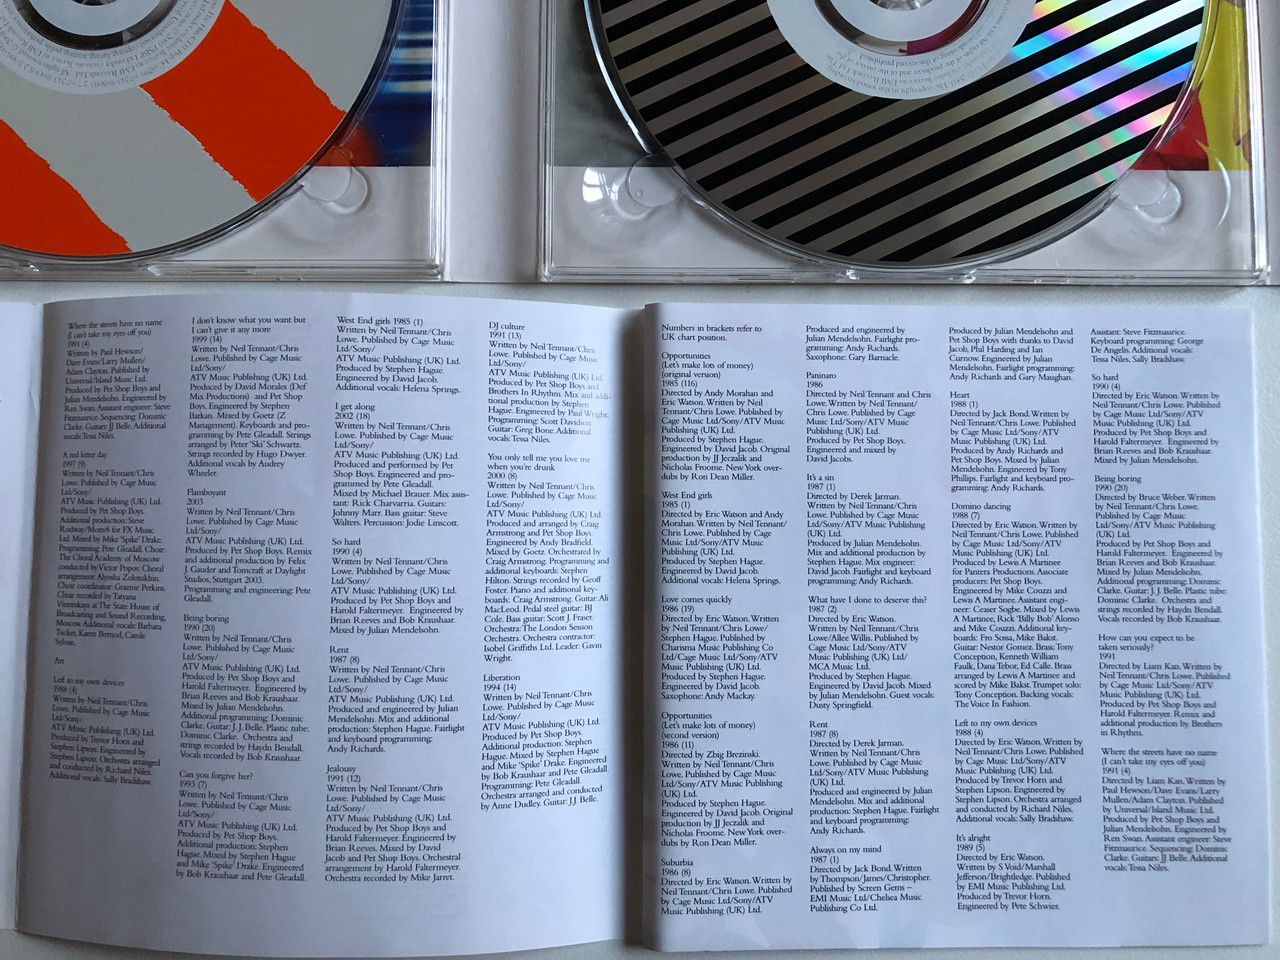 Pet Shop Boys – PopArt (The Hits) / Includes all the hits on 2CD's and DVD  featuring 41 videos! / Parlophone 2x Audio CD + DVD CD 2003 / 5099950903122  - bibleinmylanguage